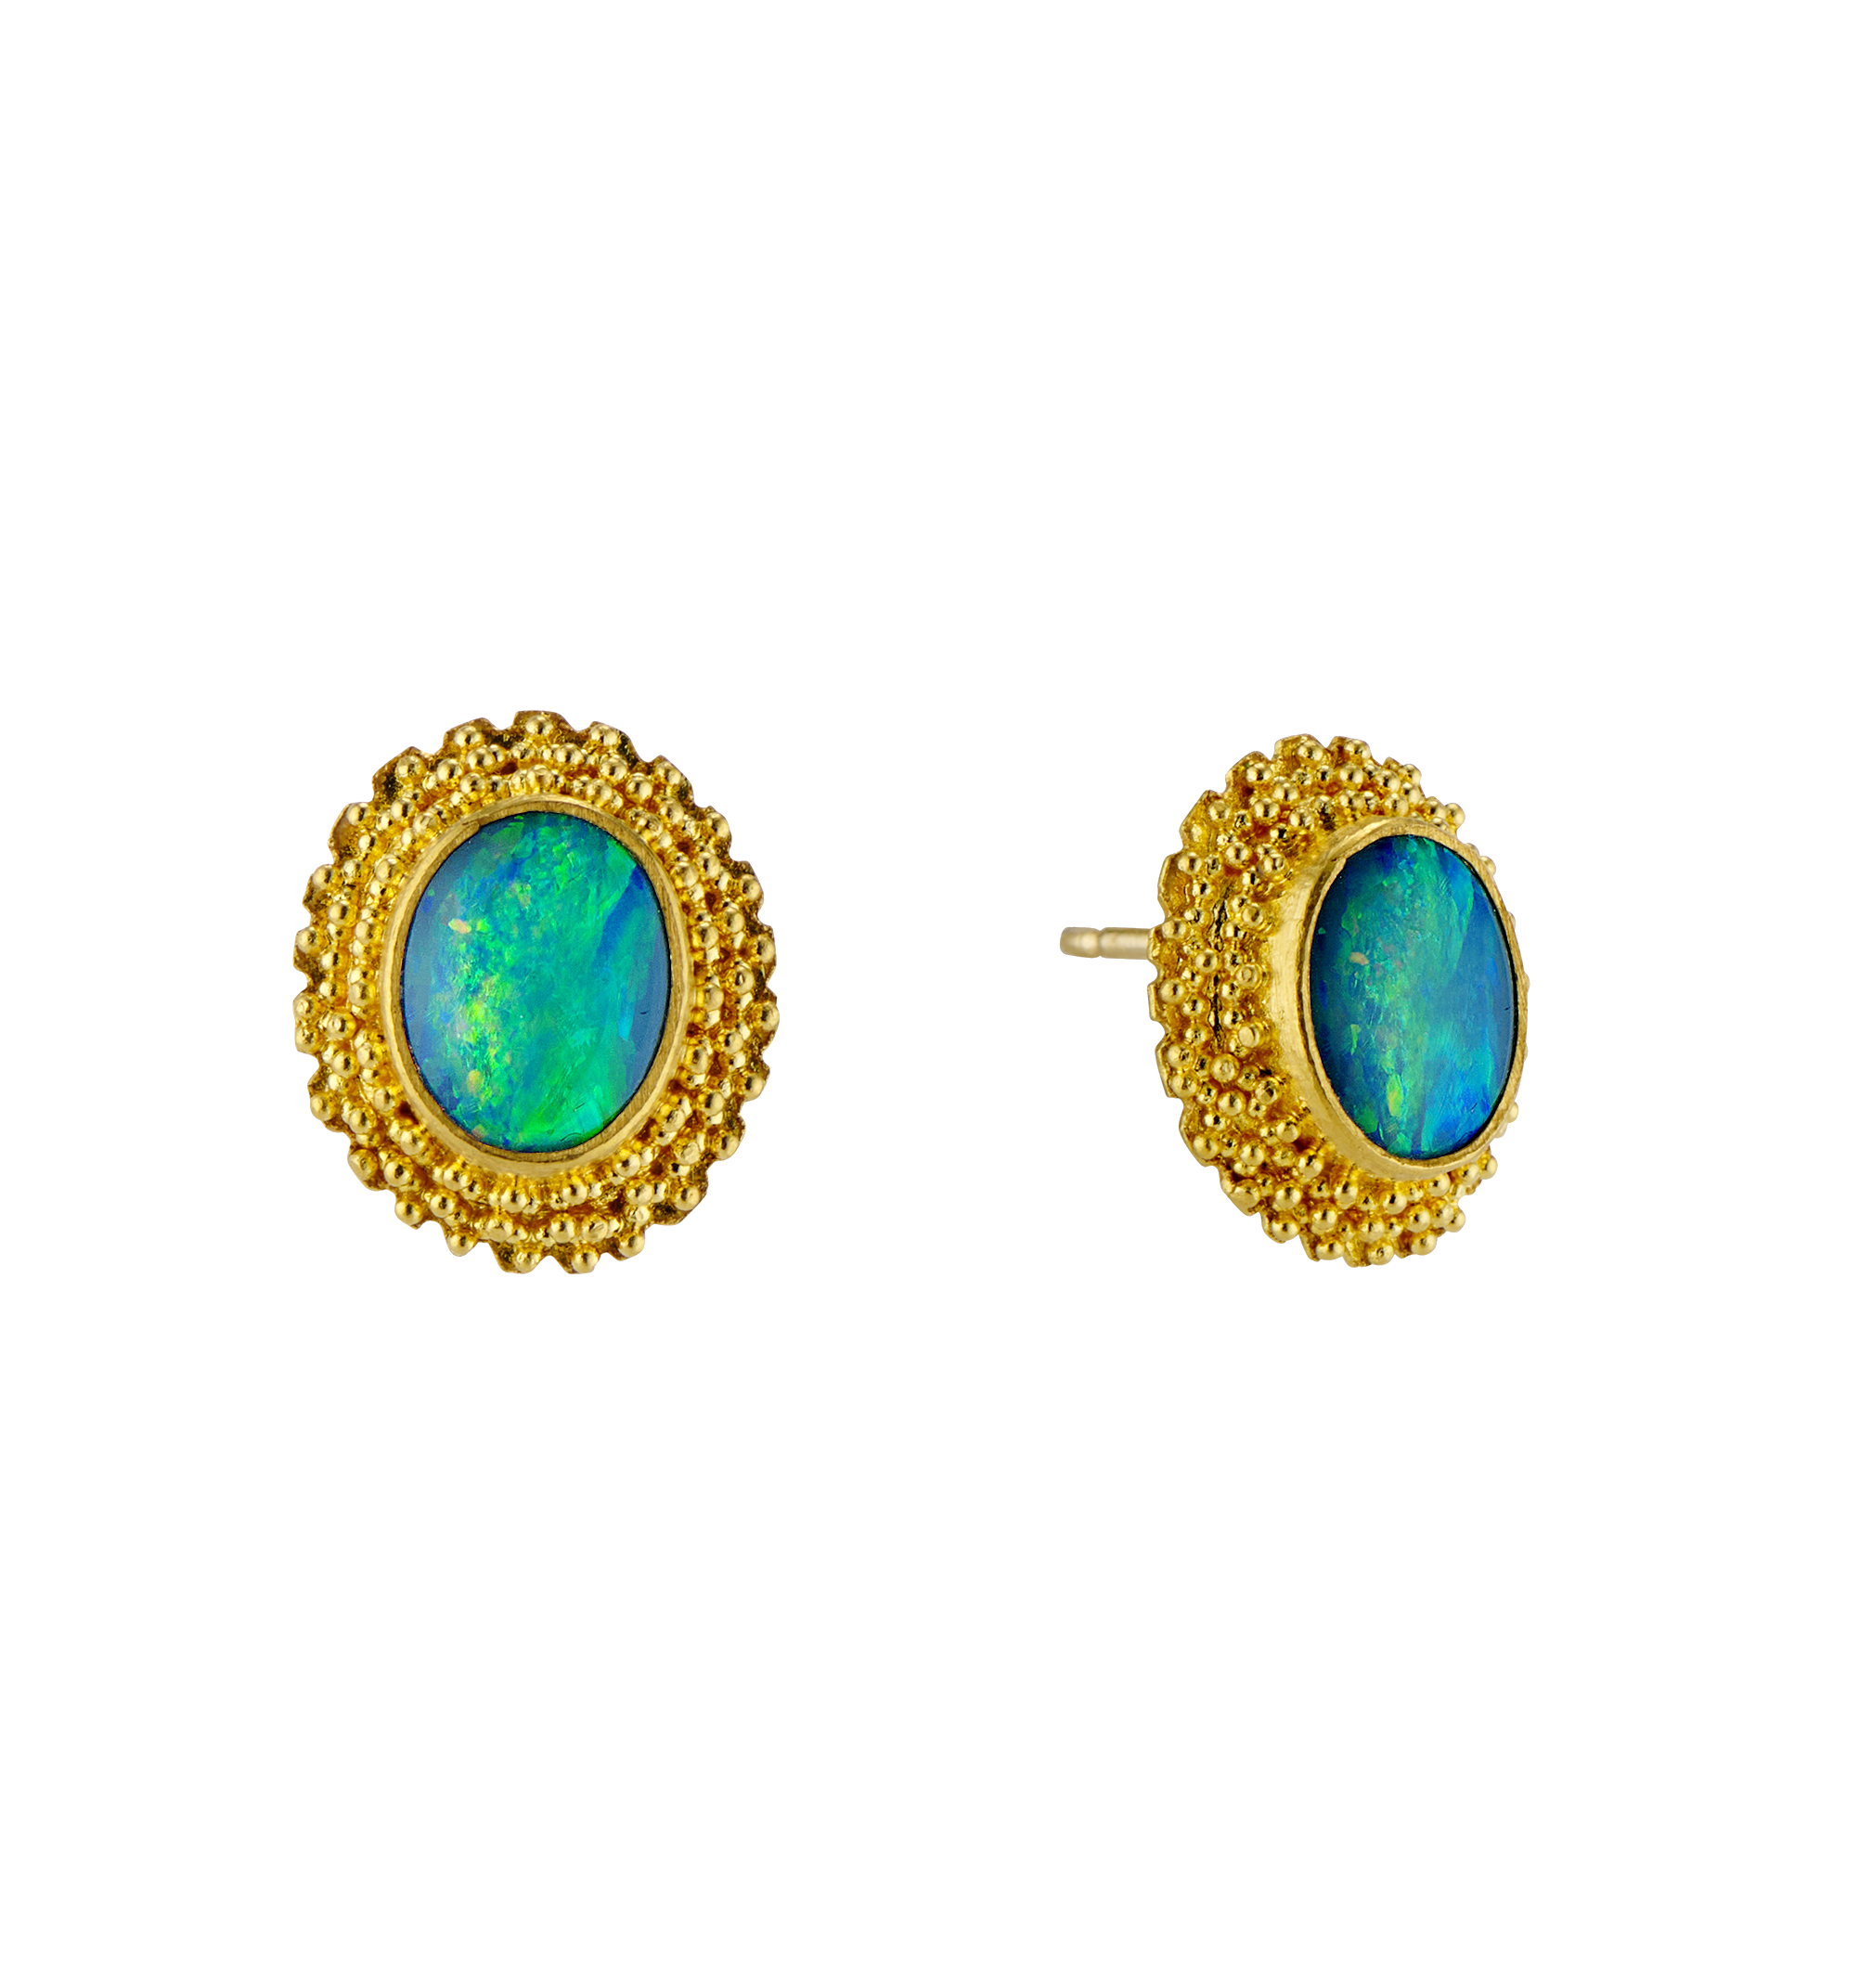 These earrings are fabricated in 22k gold, fused, granulated, and set with two Ethiopian opals.